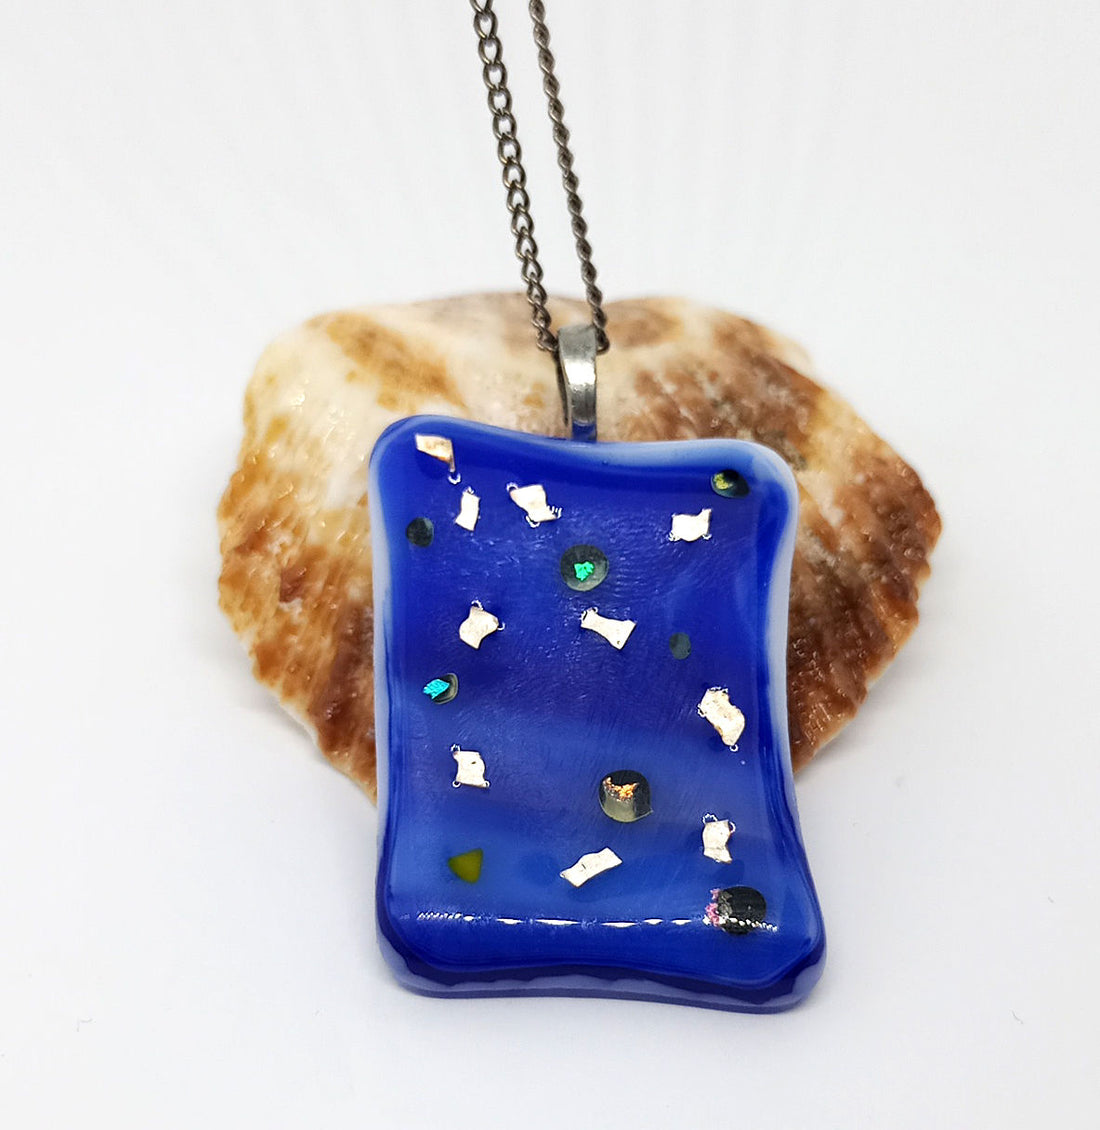 Handcrafted Fused Glass Pendant | Blue Glitter Design